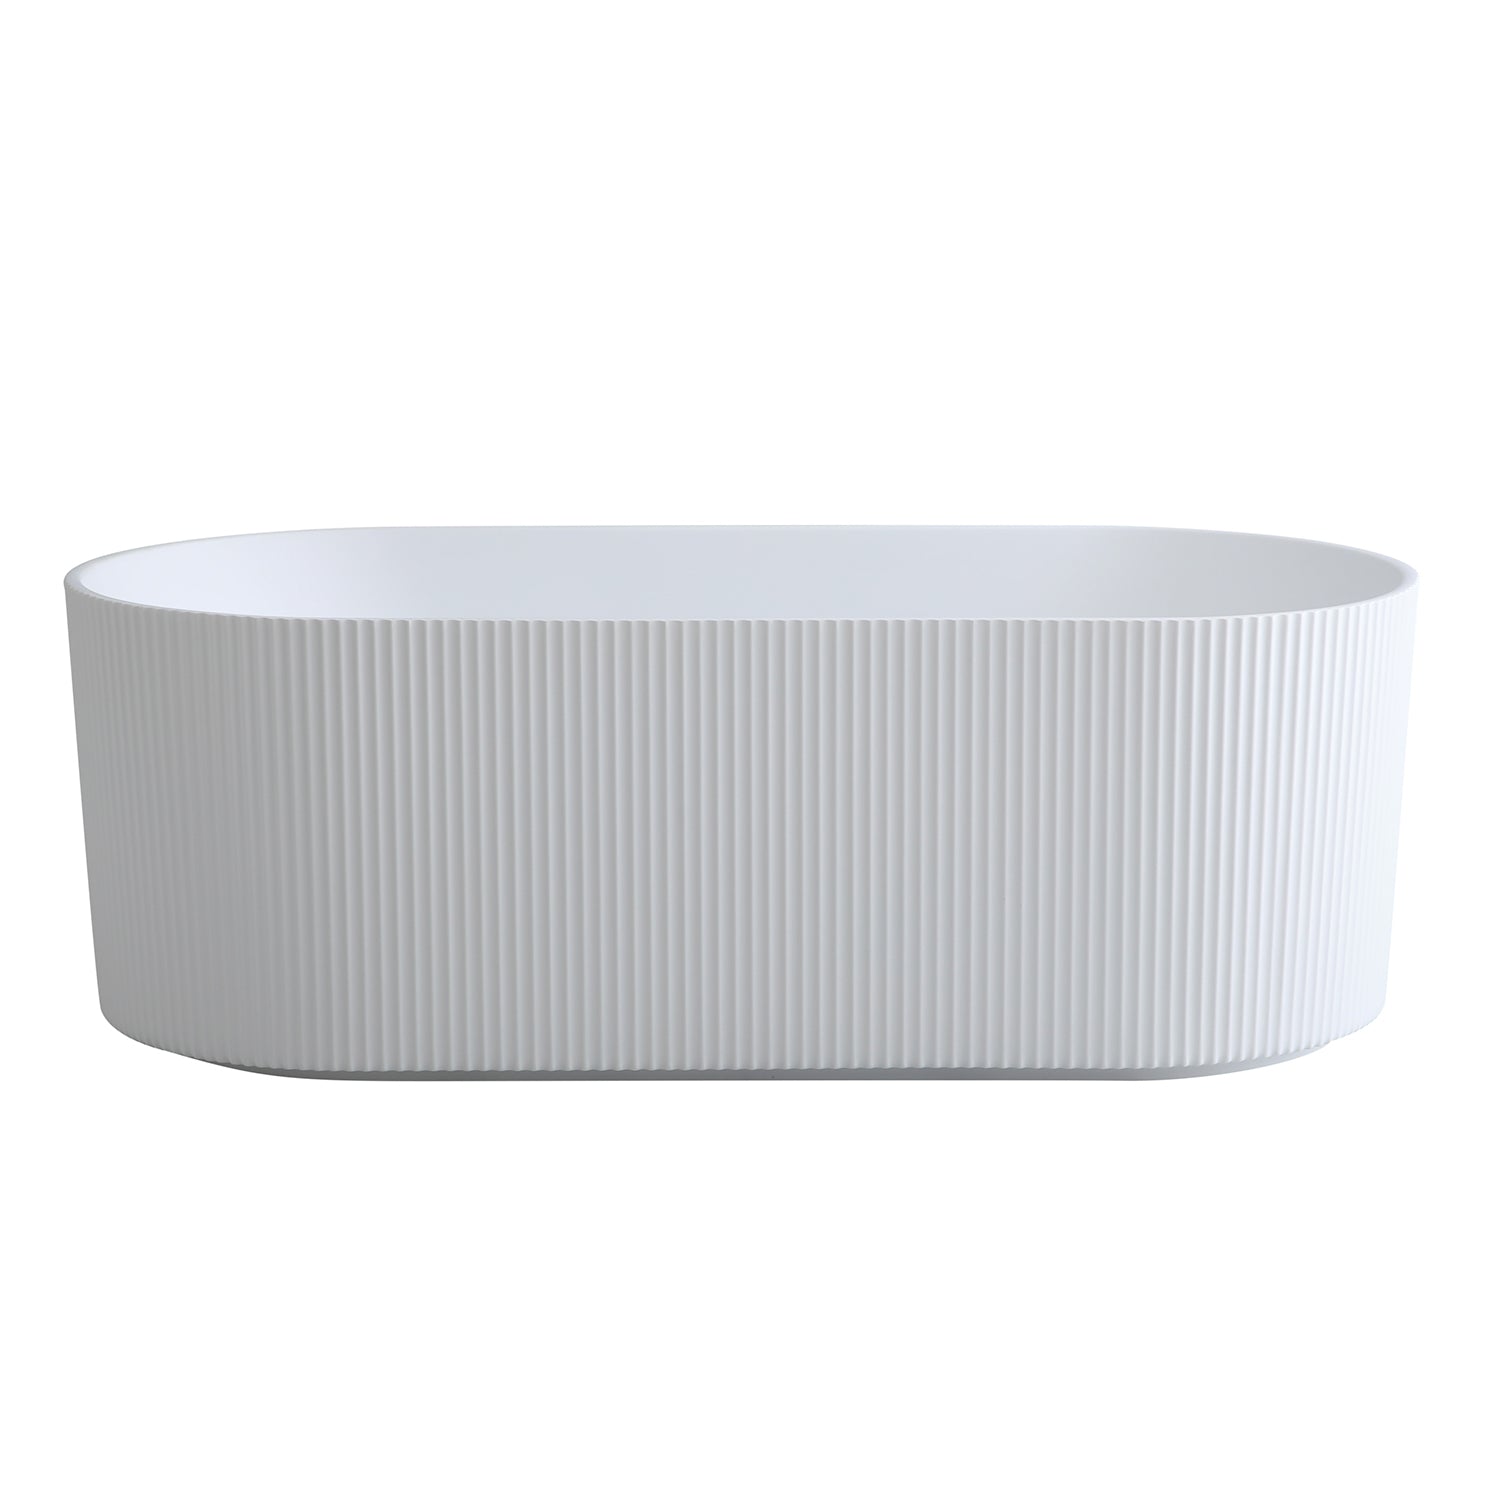 CETO ALLY GROOVE OVAL FREESTANDING BATHTUB MATTE WHITE (AVAILABLE IN 1500MM AND 1700MM)